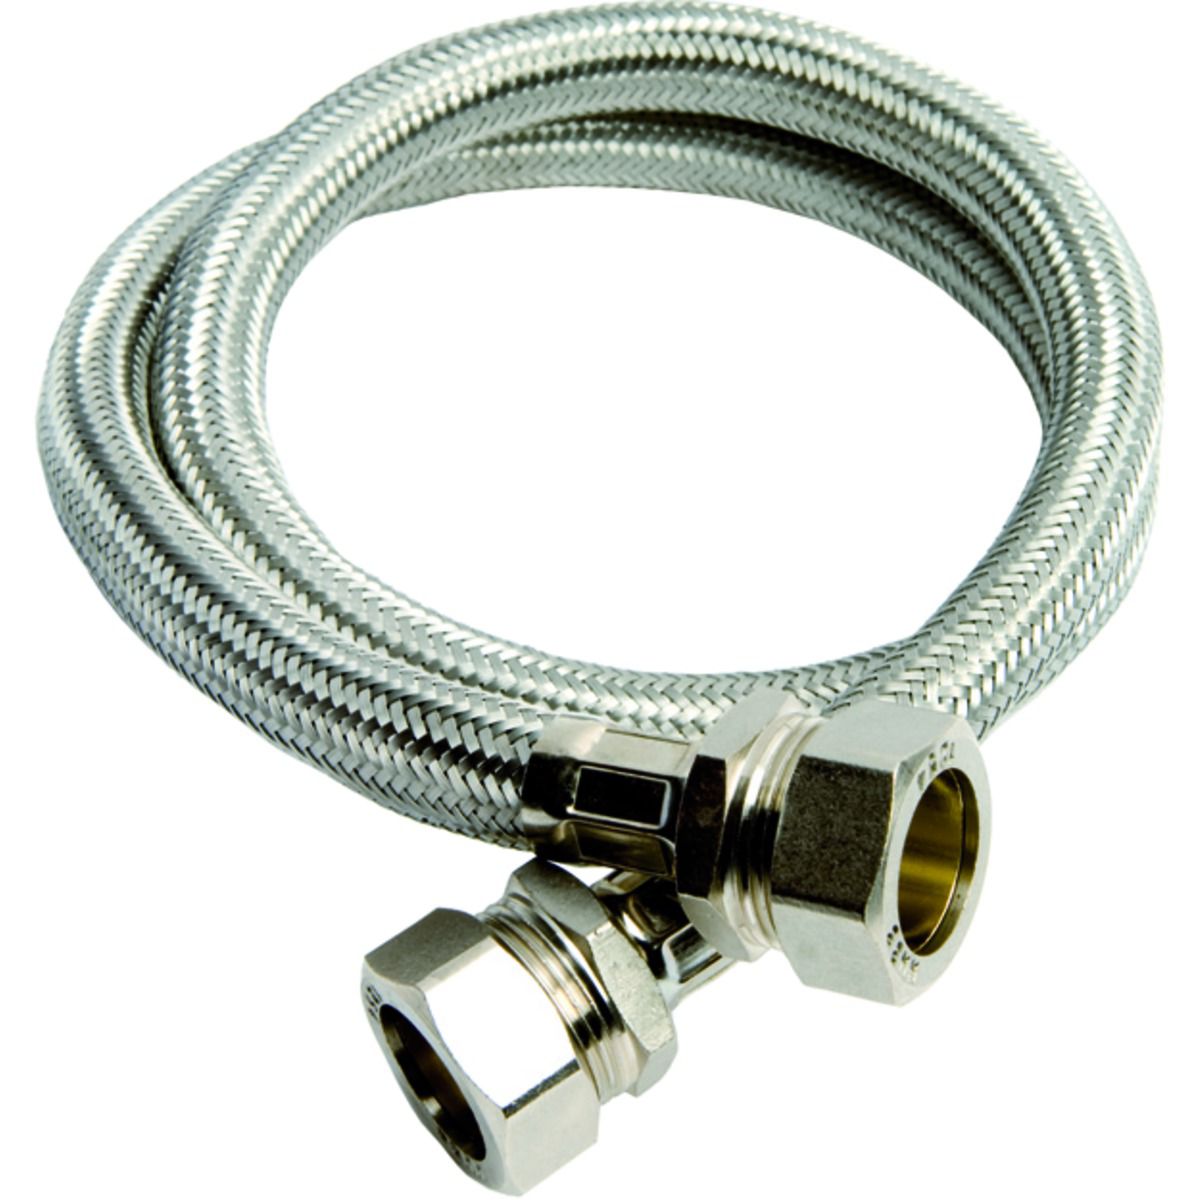 Image of Primaflow Flexible Compression Tap Connector - 15 X 15 X 1000mm